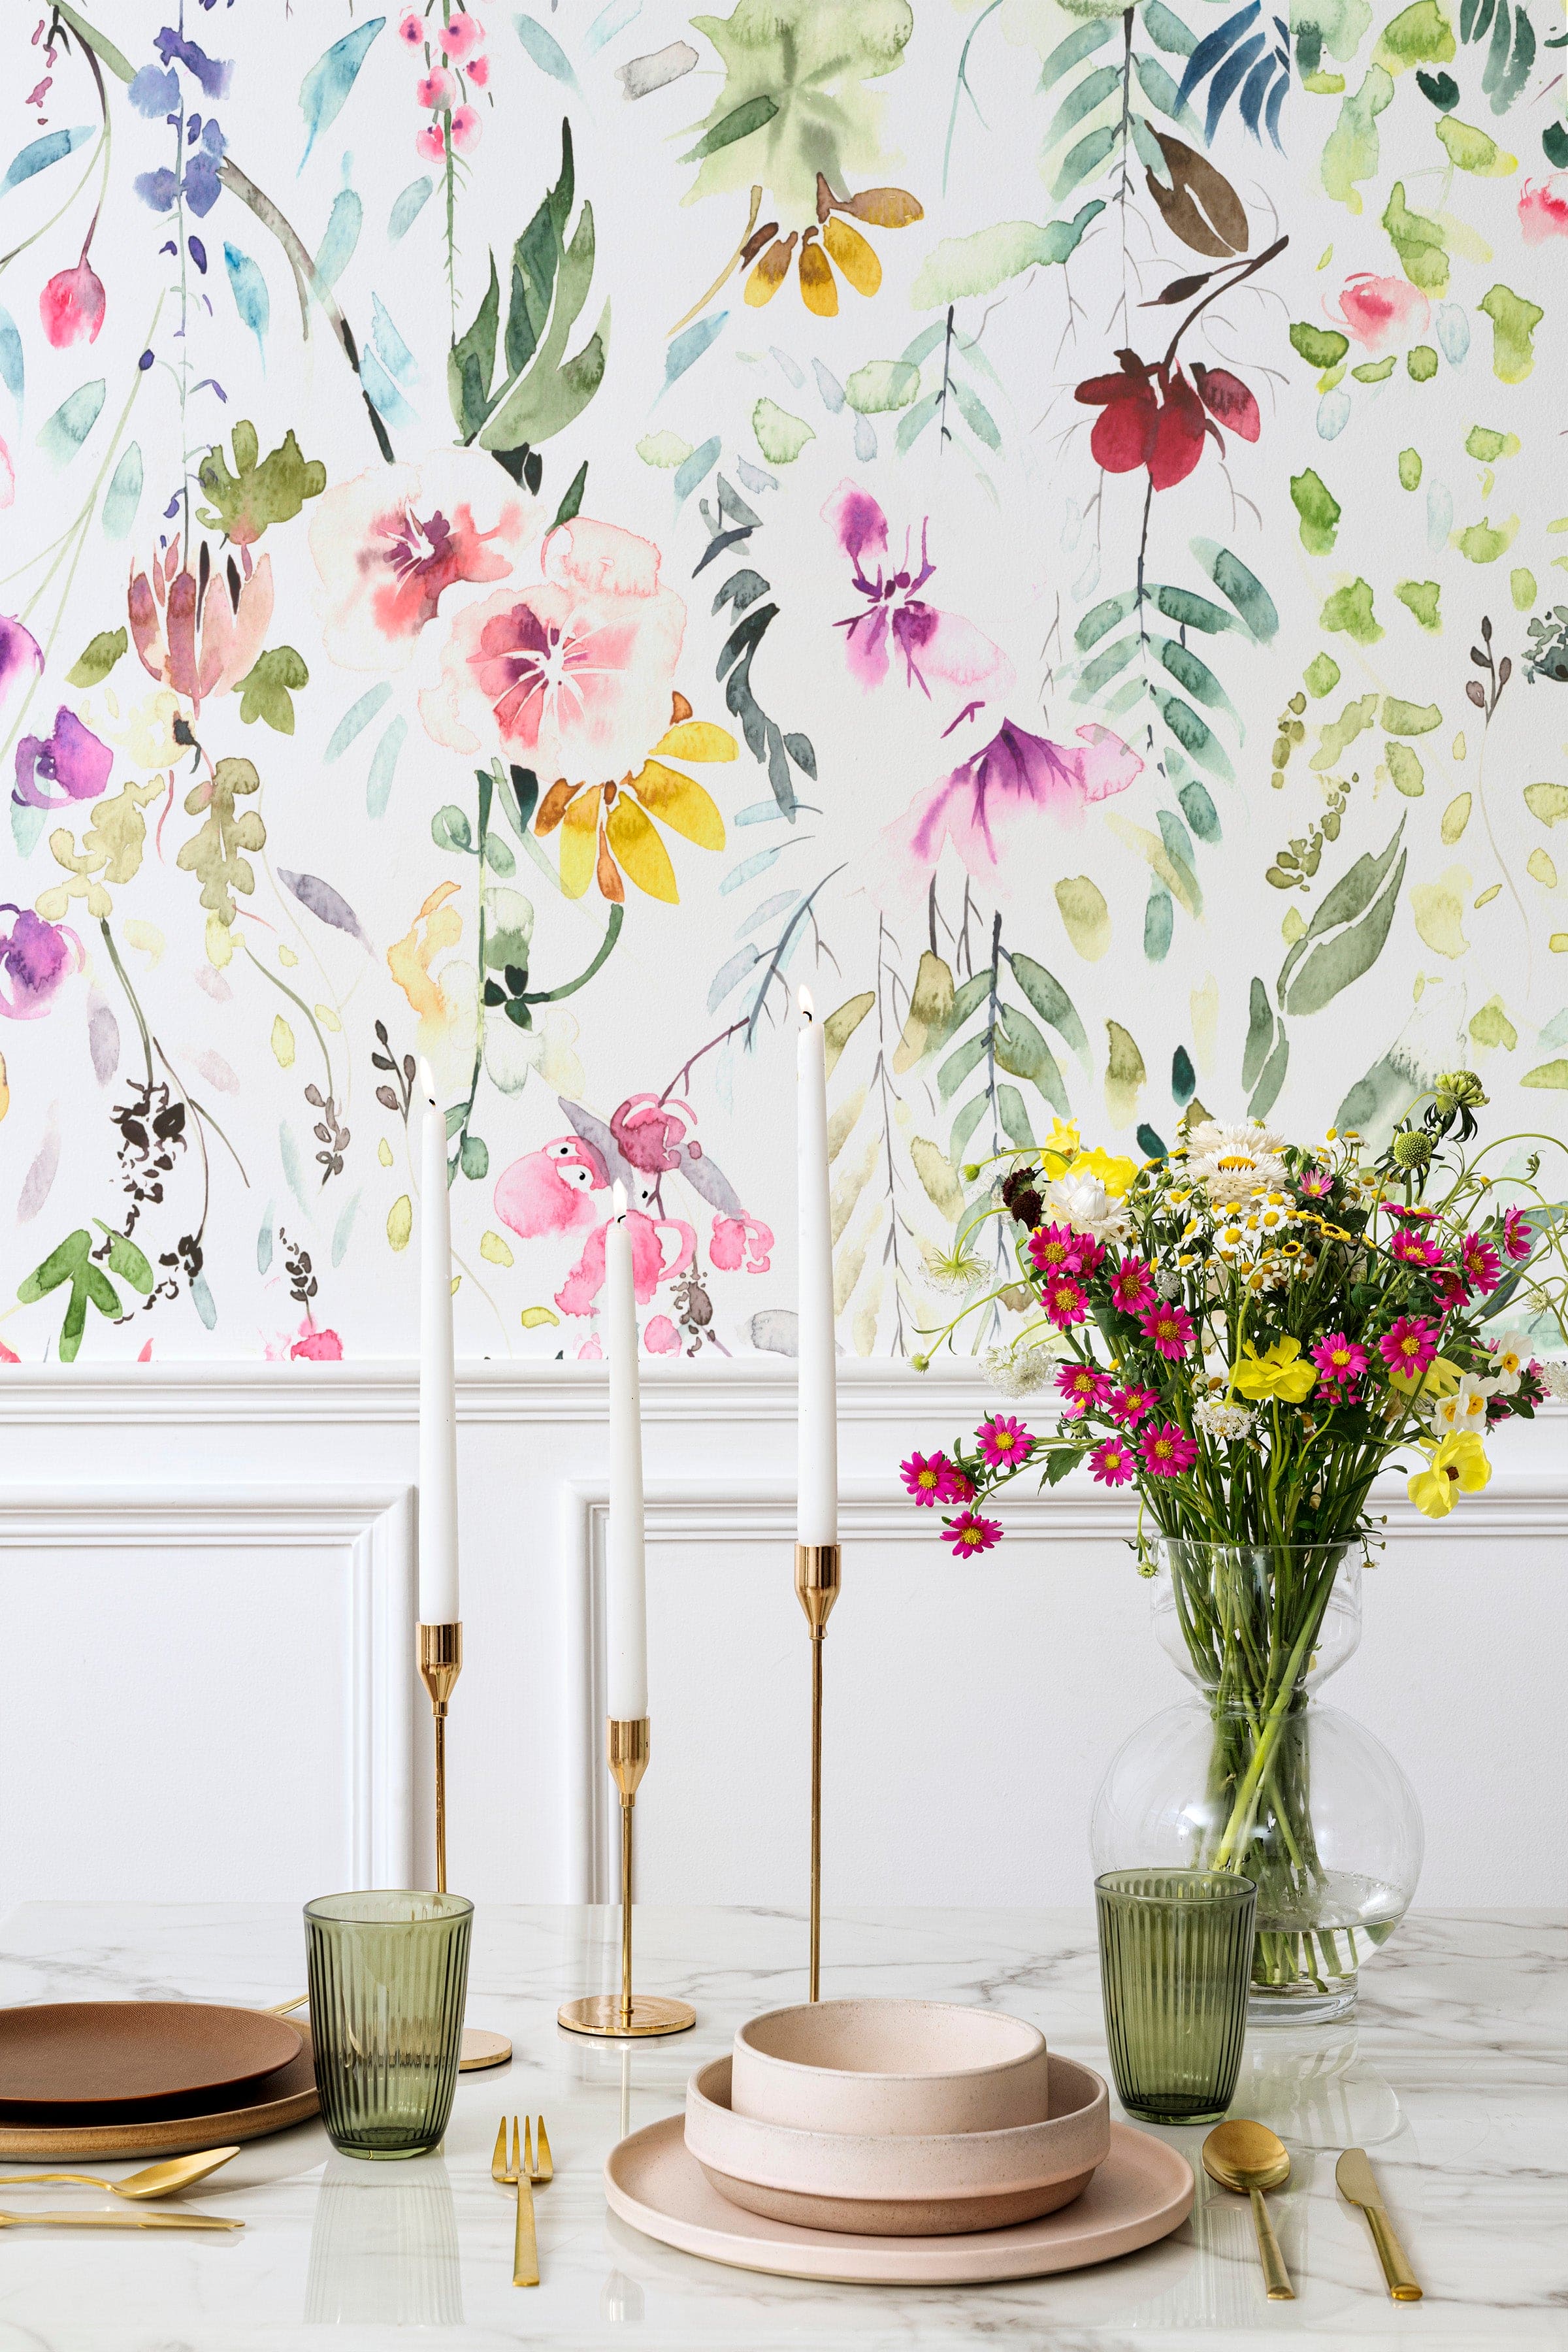 A sophisticated dining area with Hera's Floral Wallpaper as a backdrop. The wall is adorned with this vivid floral pattern, setting a festive and elegant atmosphere for the dining space, complete with tall white candles and a bouquet of fresh flowers.